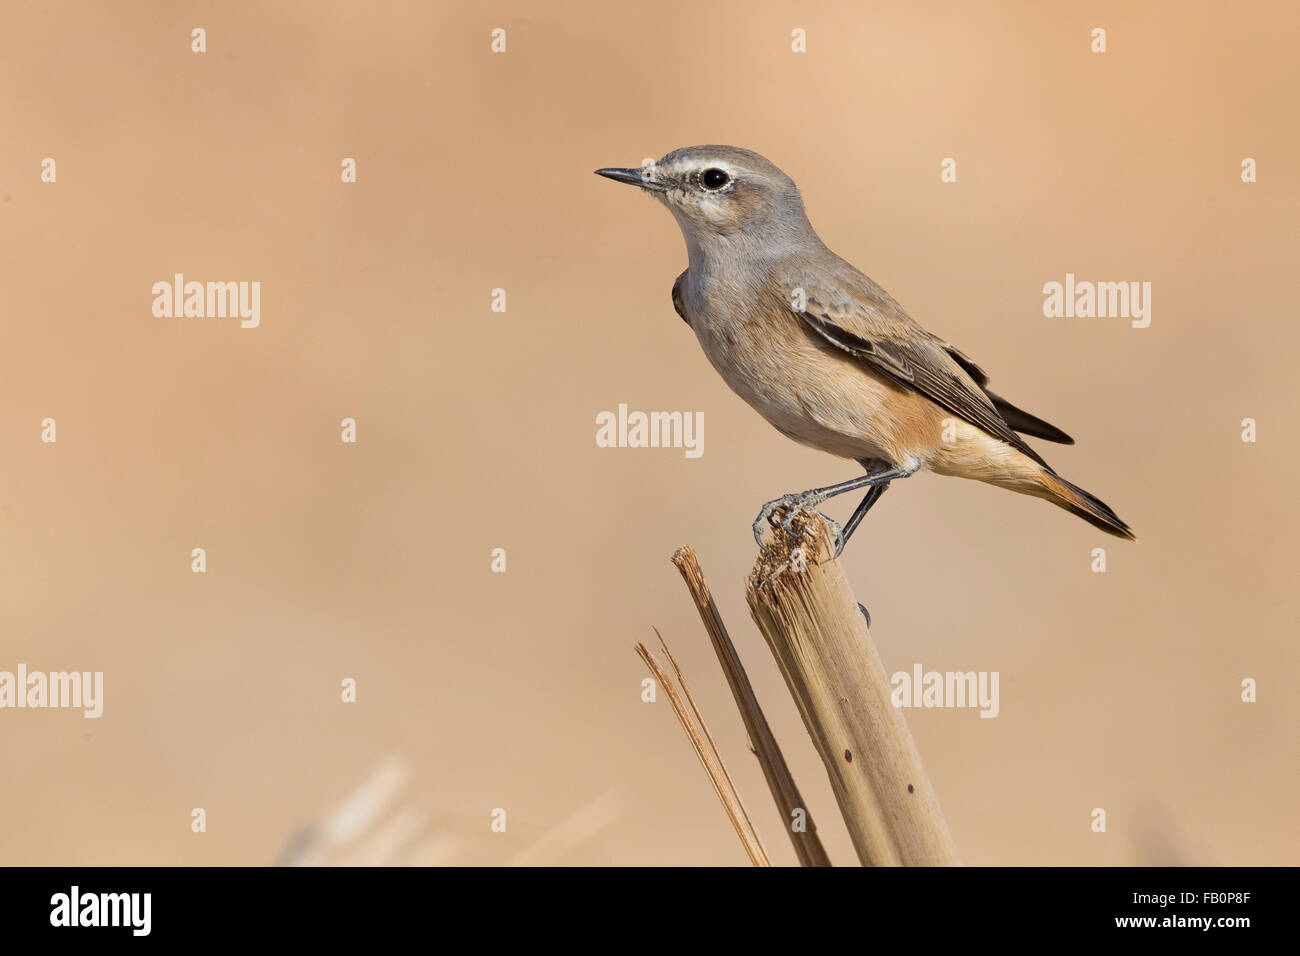 Red-tailed Wheatear (Oenanthe Oenanthe chrysopygia), Standing on a piece of wood, Qurayyat, Muscat Governorate, Oman Stock Photo